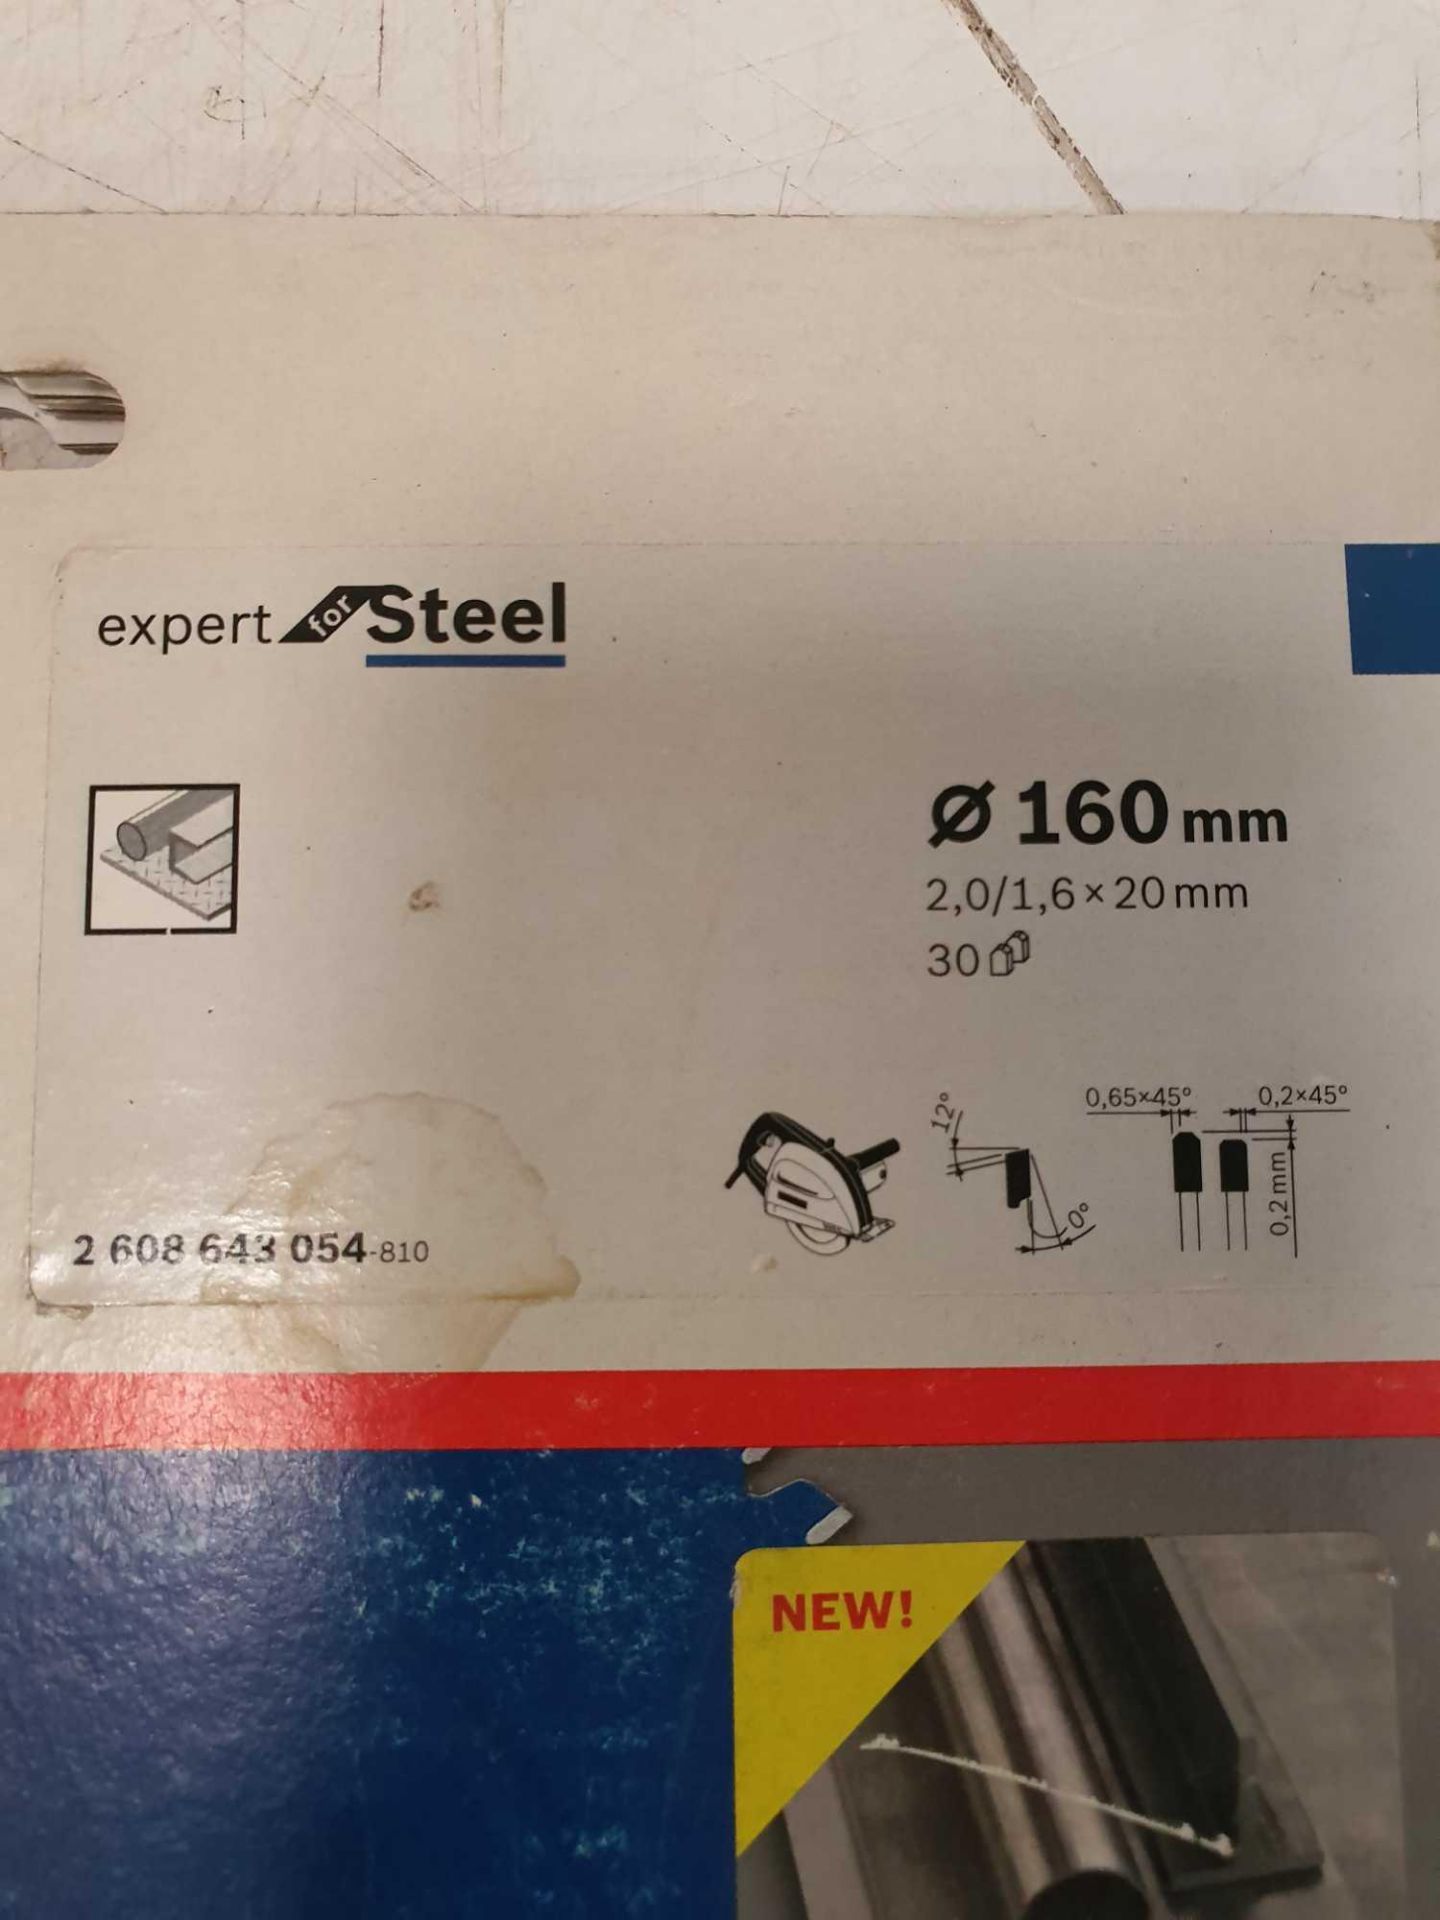 Bosch circular saw blade for steel - Image 2 of 2